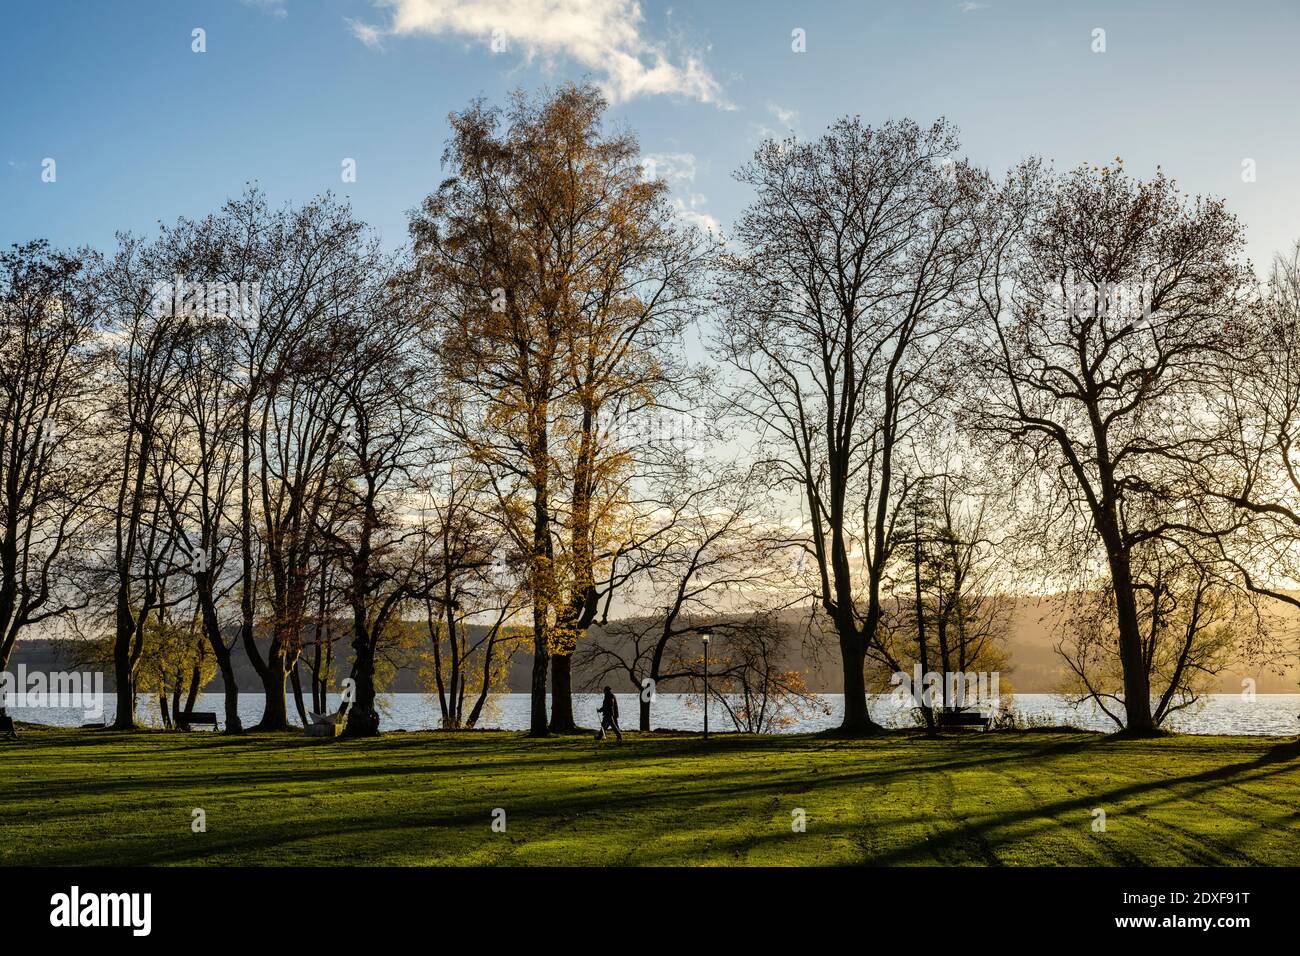 Germany, Baden-Wurttemberg, Radolfzell, Trees growing along lakeshore of Mettnaupark in autumn Stock Photo